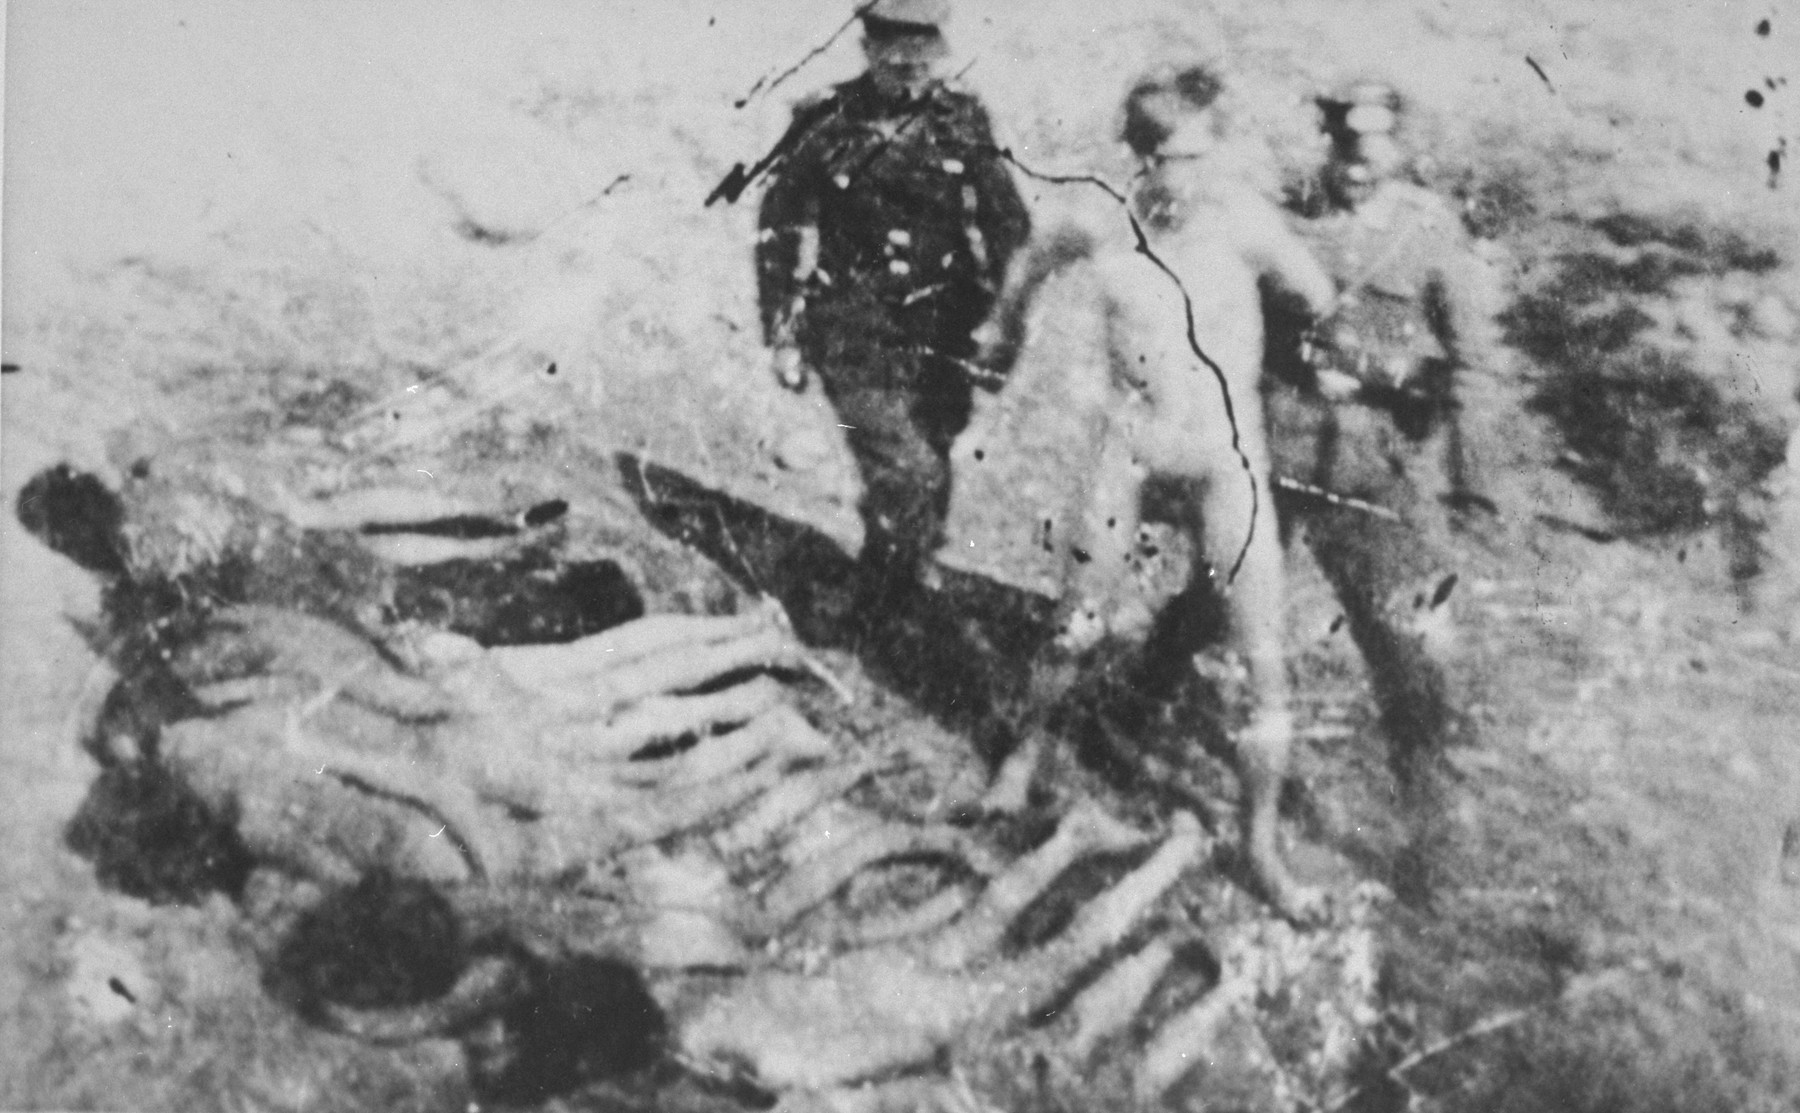 A naked prisoner is led to an execution site, possbily Ponary, where others either have been shot already or forced to lie face down prior to being shot.